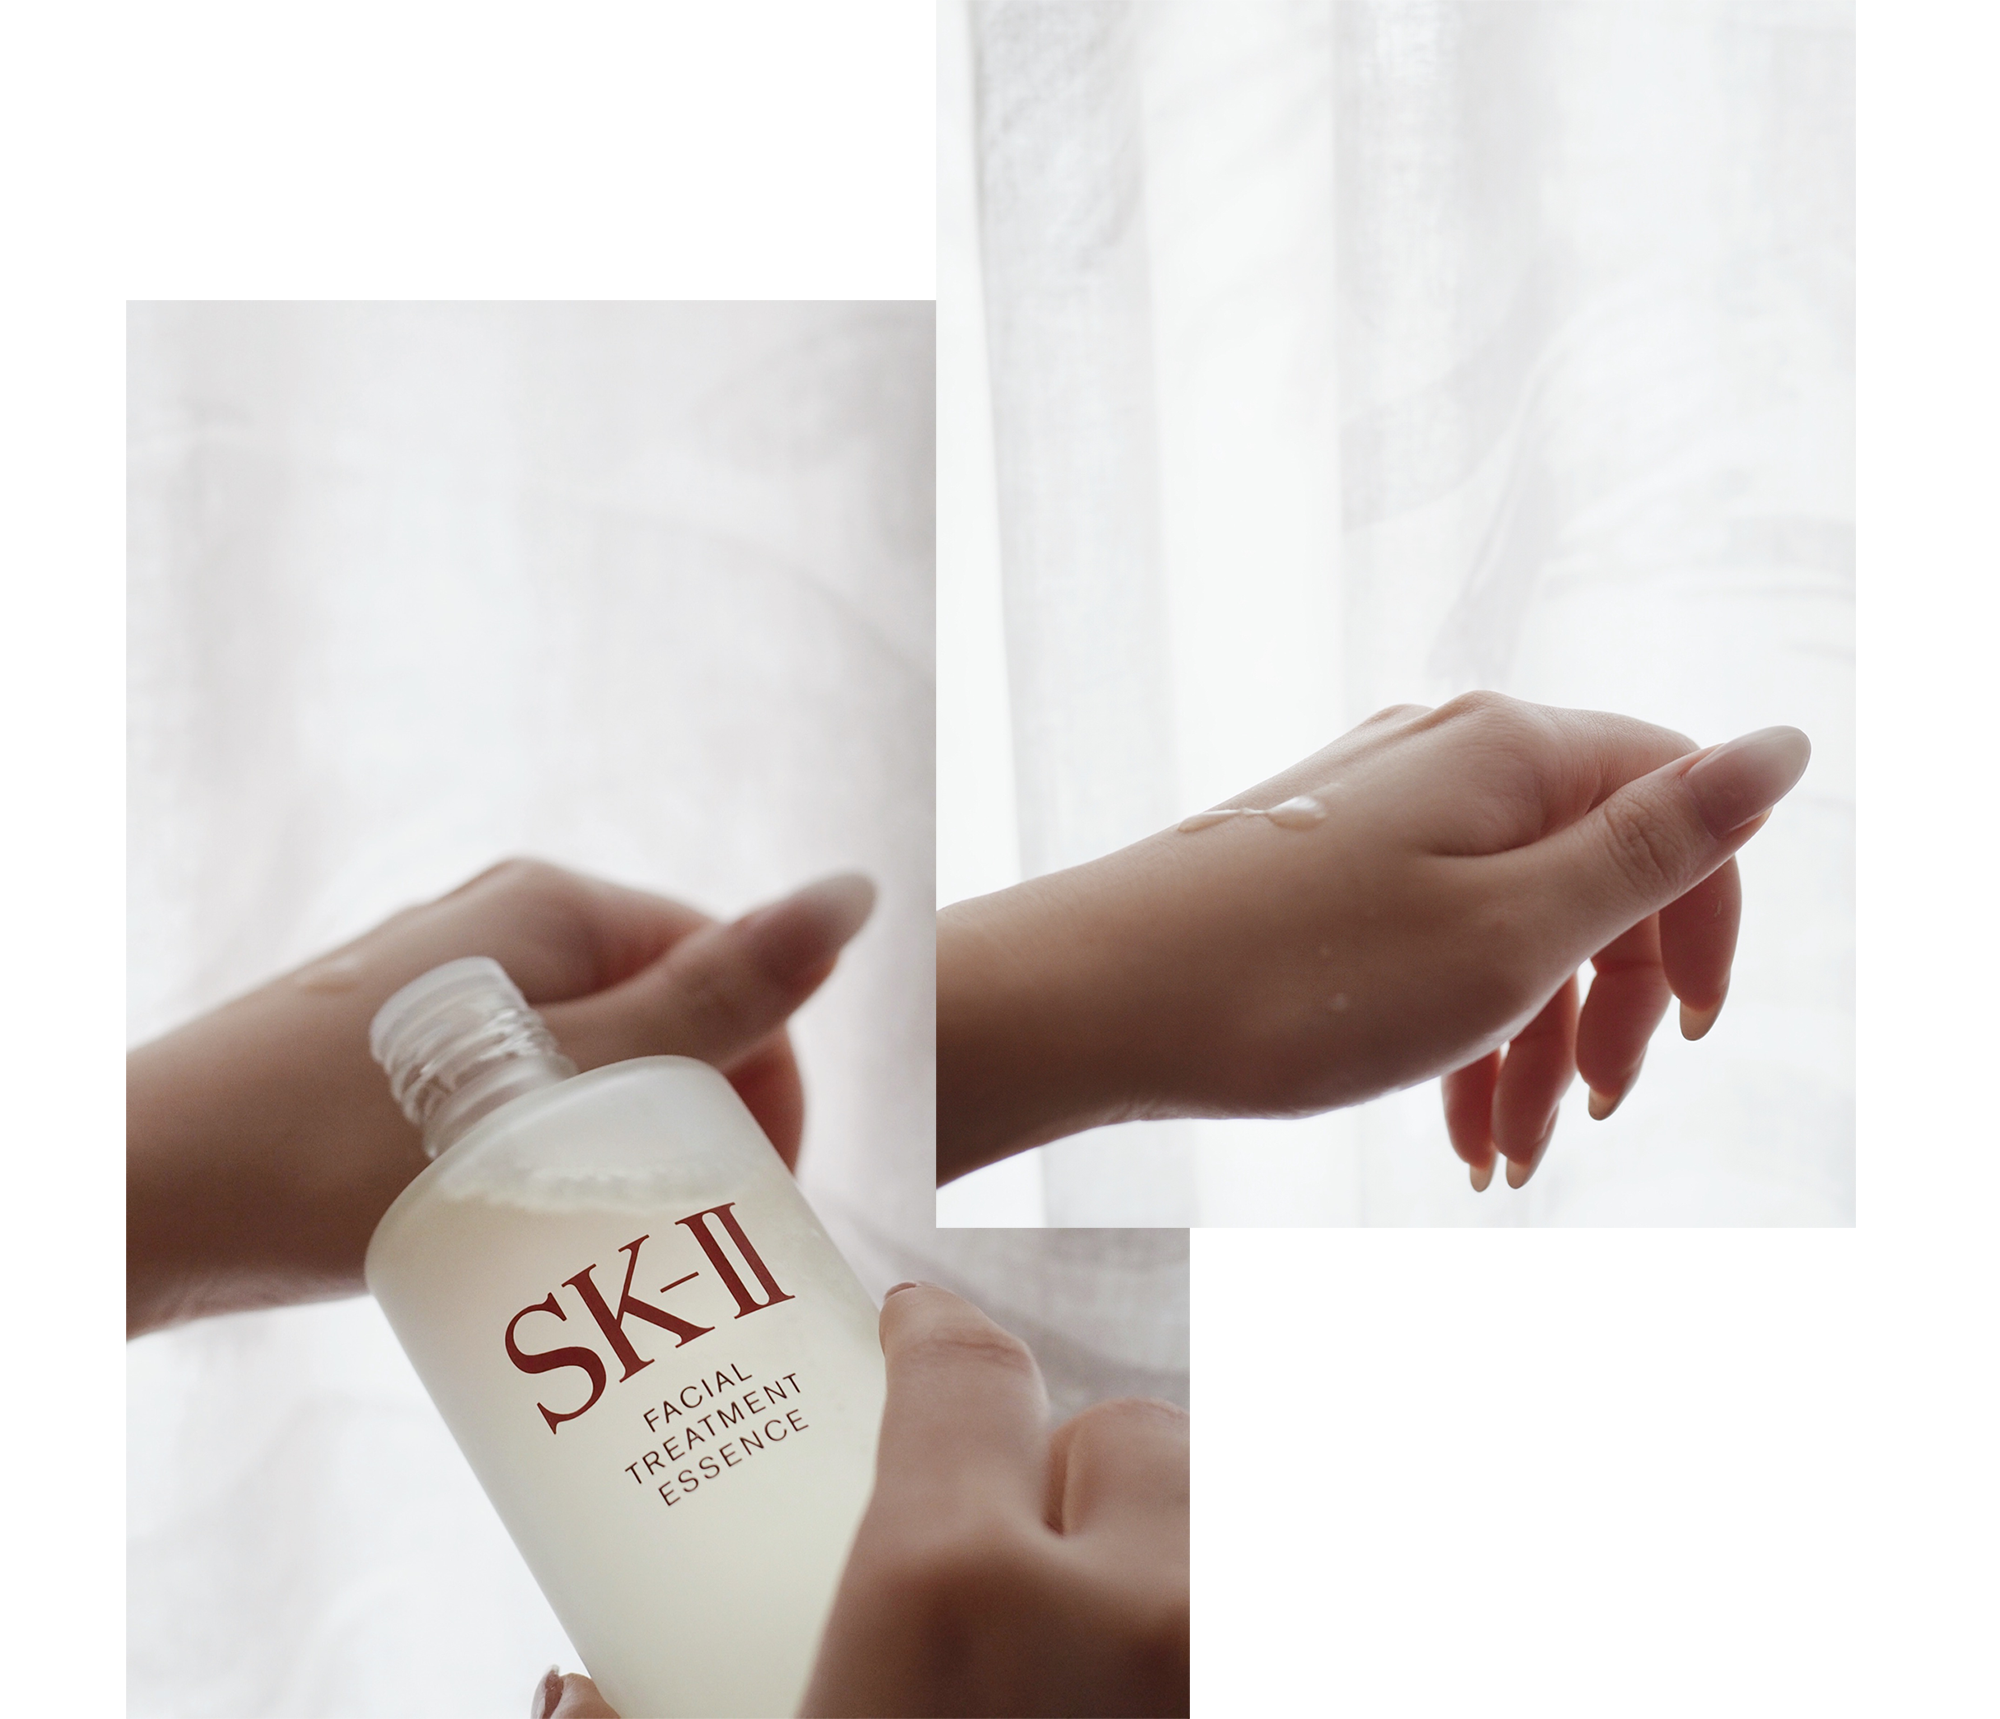 SK-II, Facial Treatment Essence, Pitera, Review, What is Pitera made from, Does SK-II really work, Where to buy SK-II in Singapore, SK-II Before and After, SK-II Duty Free, SK-II Side Effects